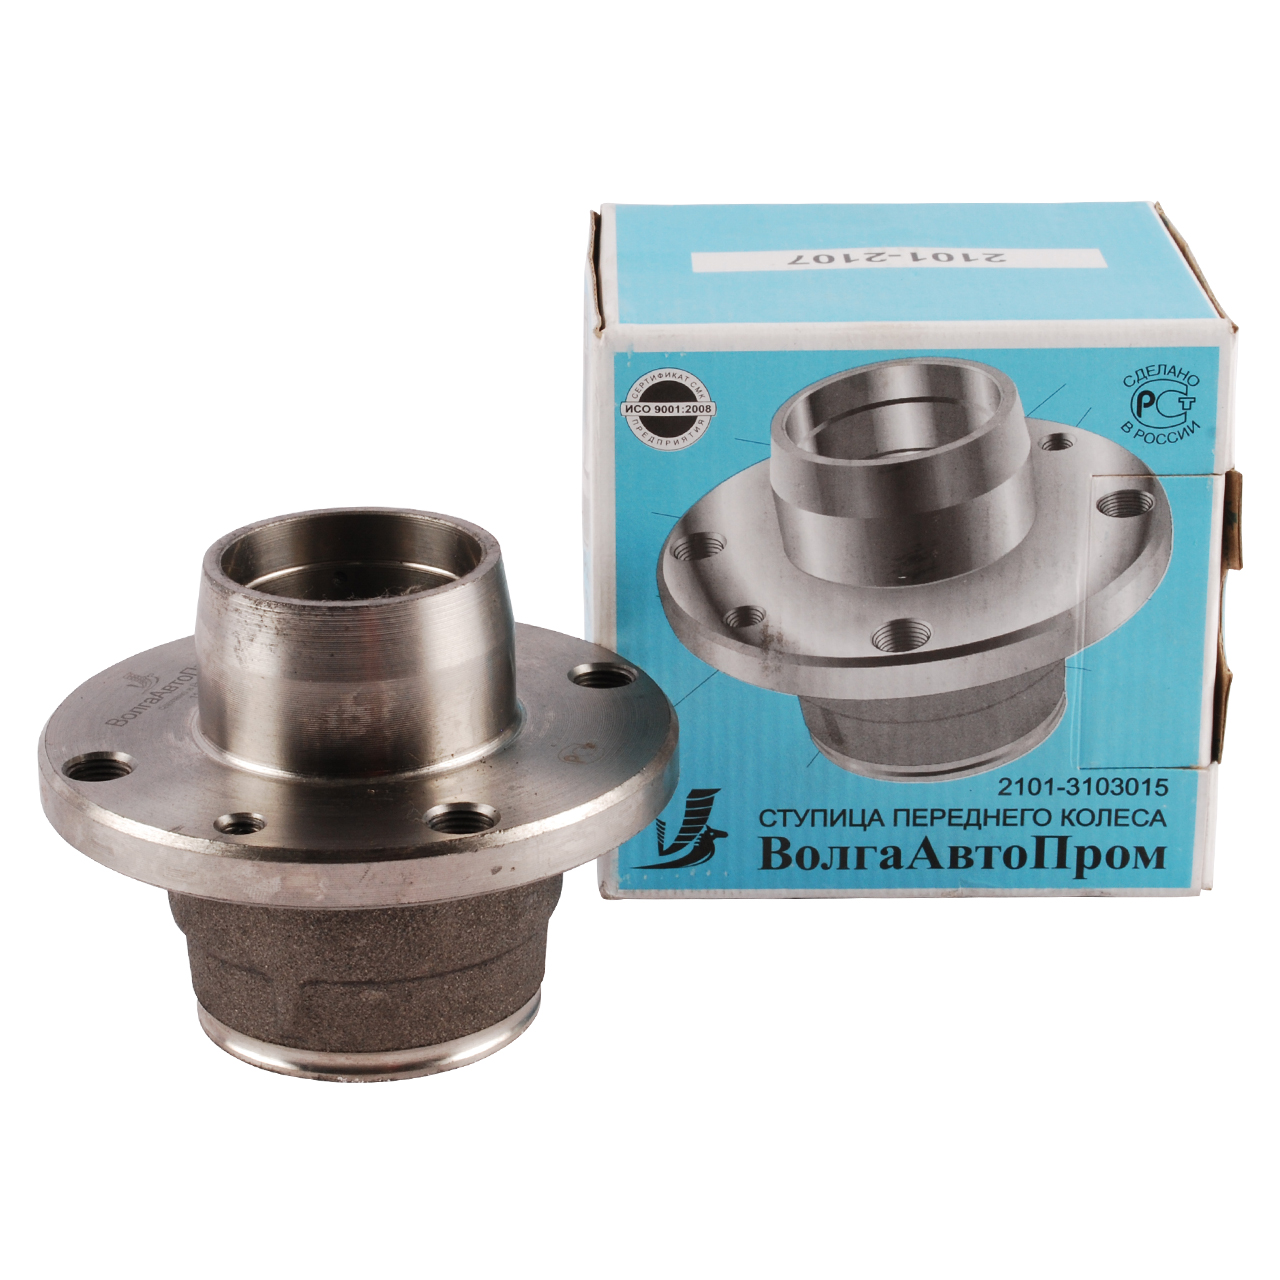 Front Wheel hub with 2 bearings for Lada 2101-2107, 2101-3103014